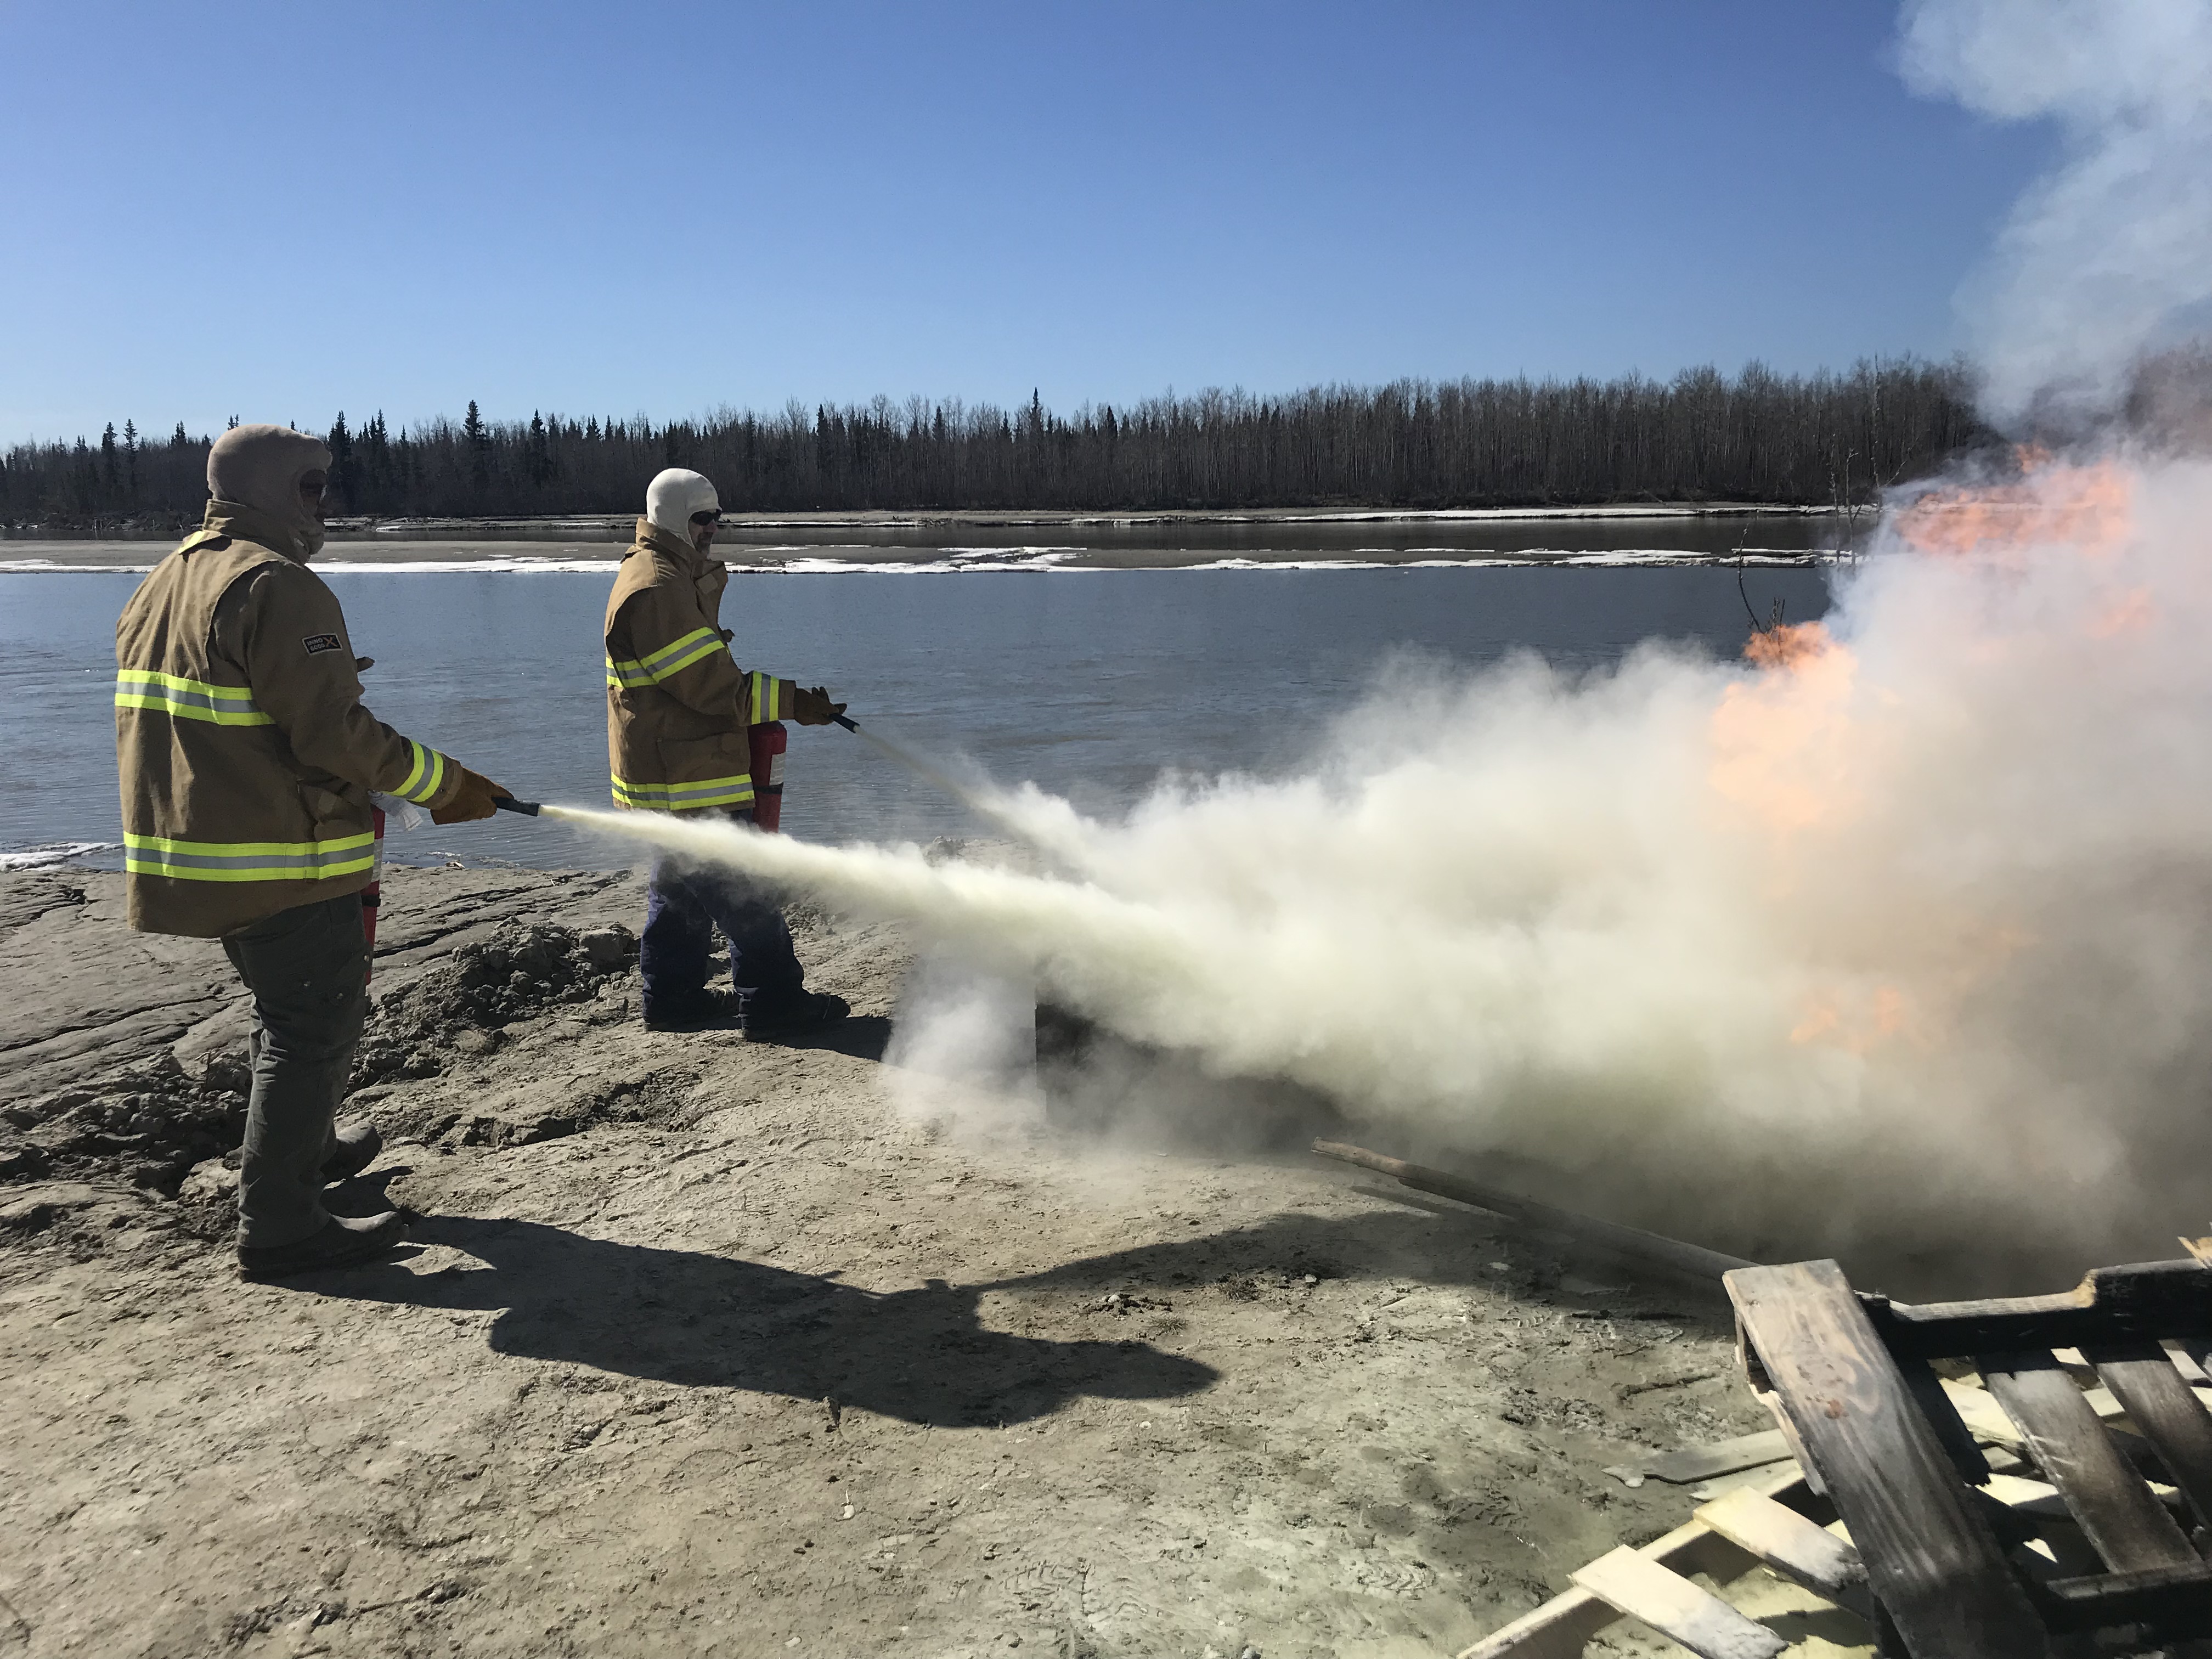 m safe training conducted for extinguishing fires.